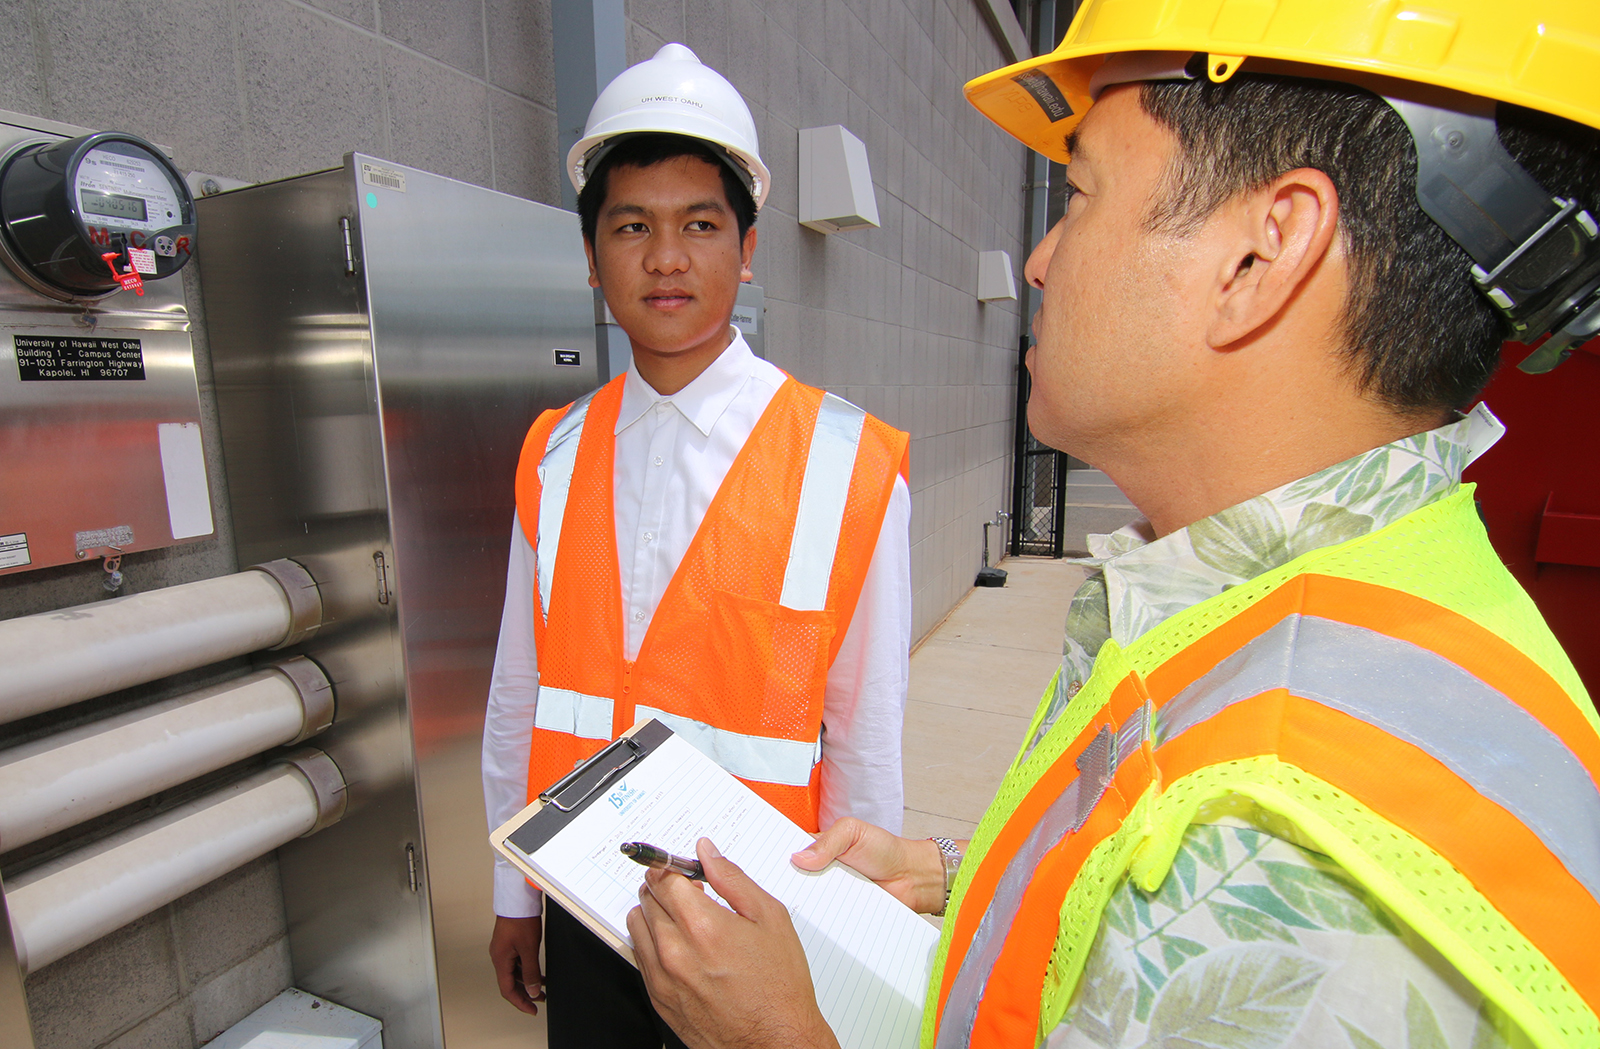 Facilities Management student getting instruction from a supervisor.